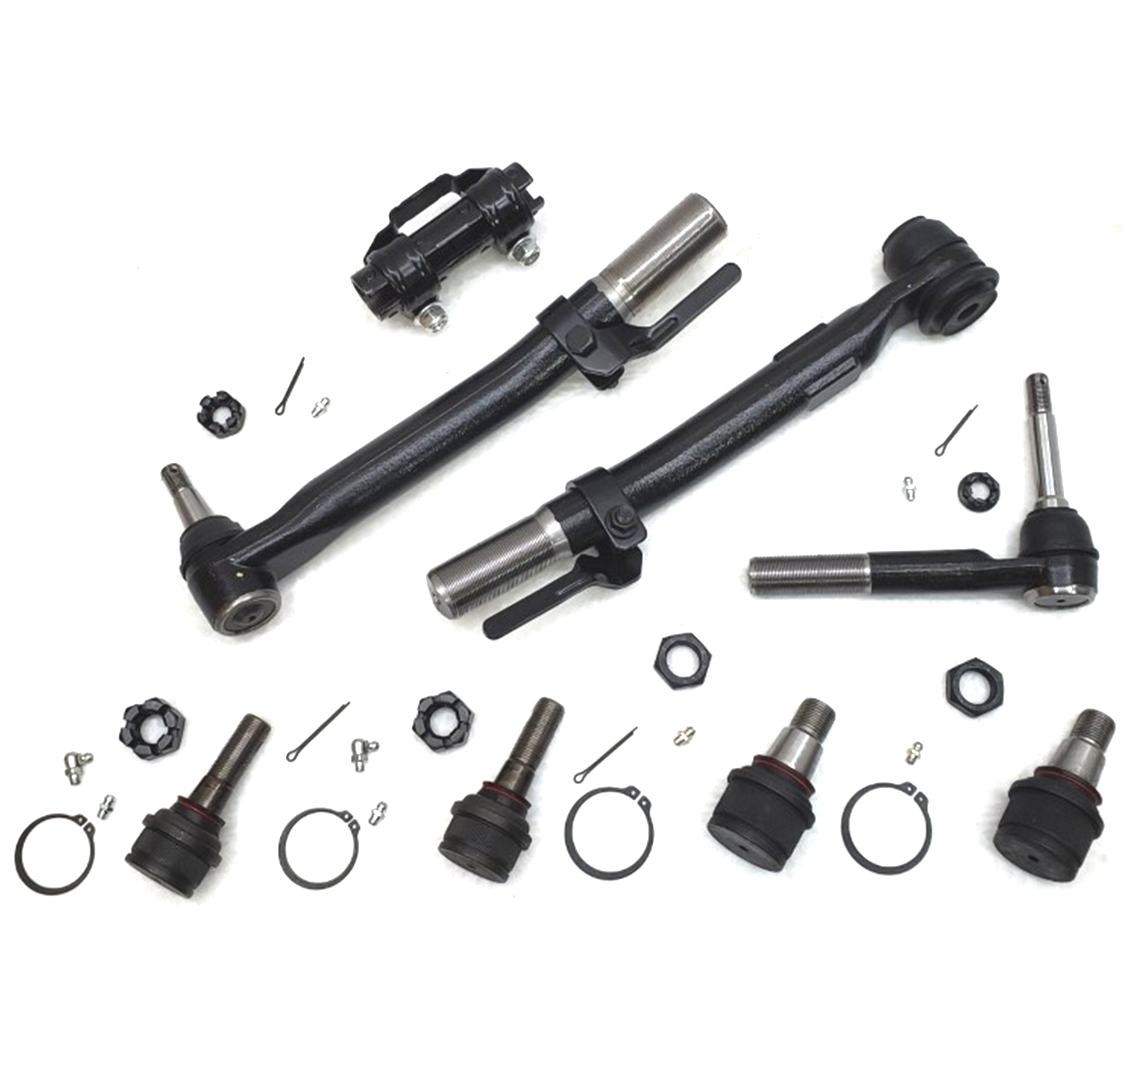 Lifetime Auto Parts Ball Joint & Tie Rod Kit for 2017-2019 Ford F250, F350 Super Duty 4x4 Wide Frame